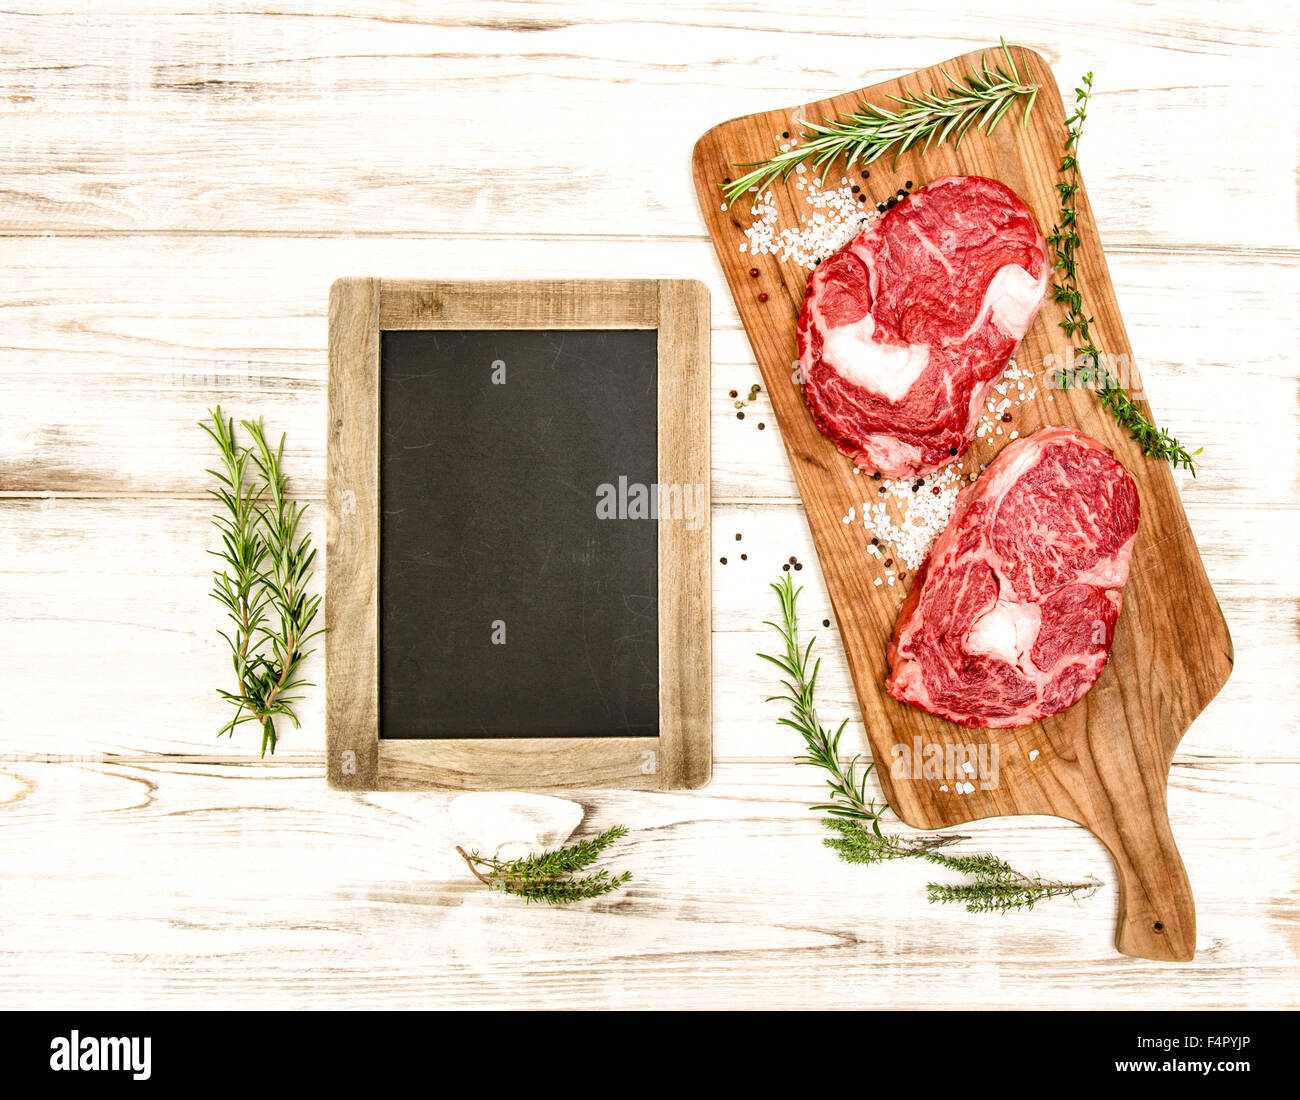 Raw fresh meat with herbs, spices and blackboard on wooden desk. Food background Stock Photo